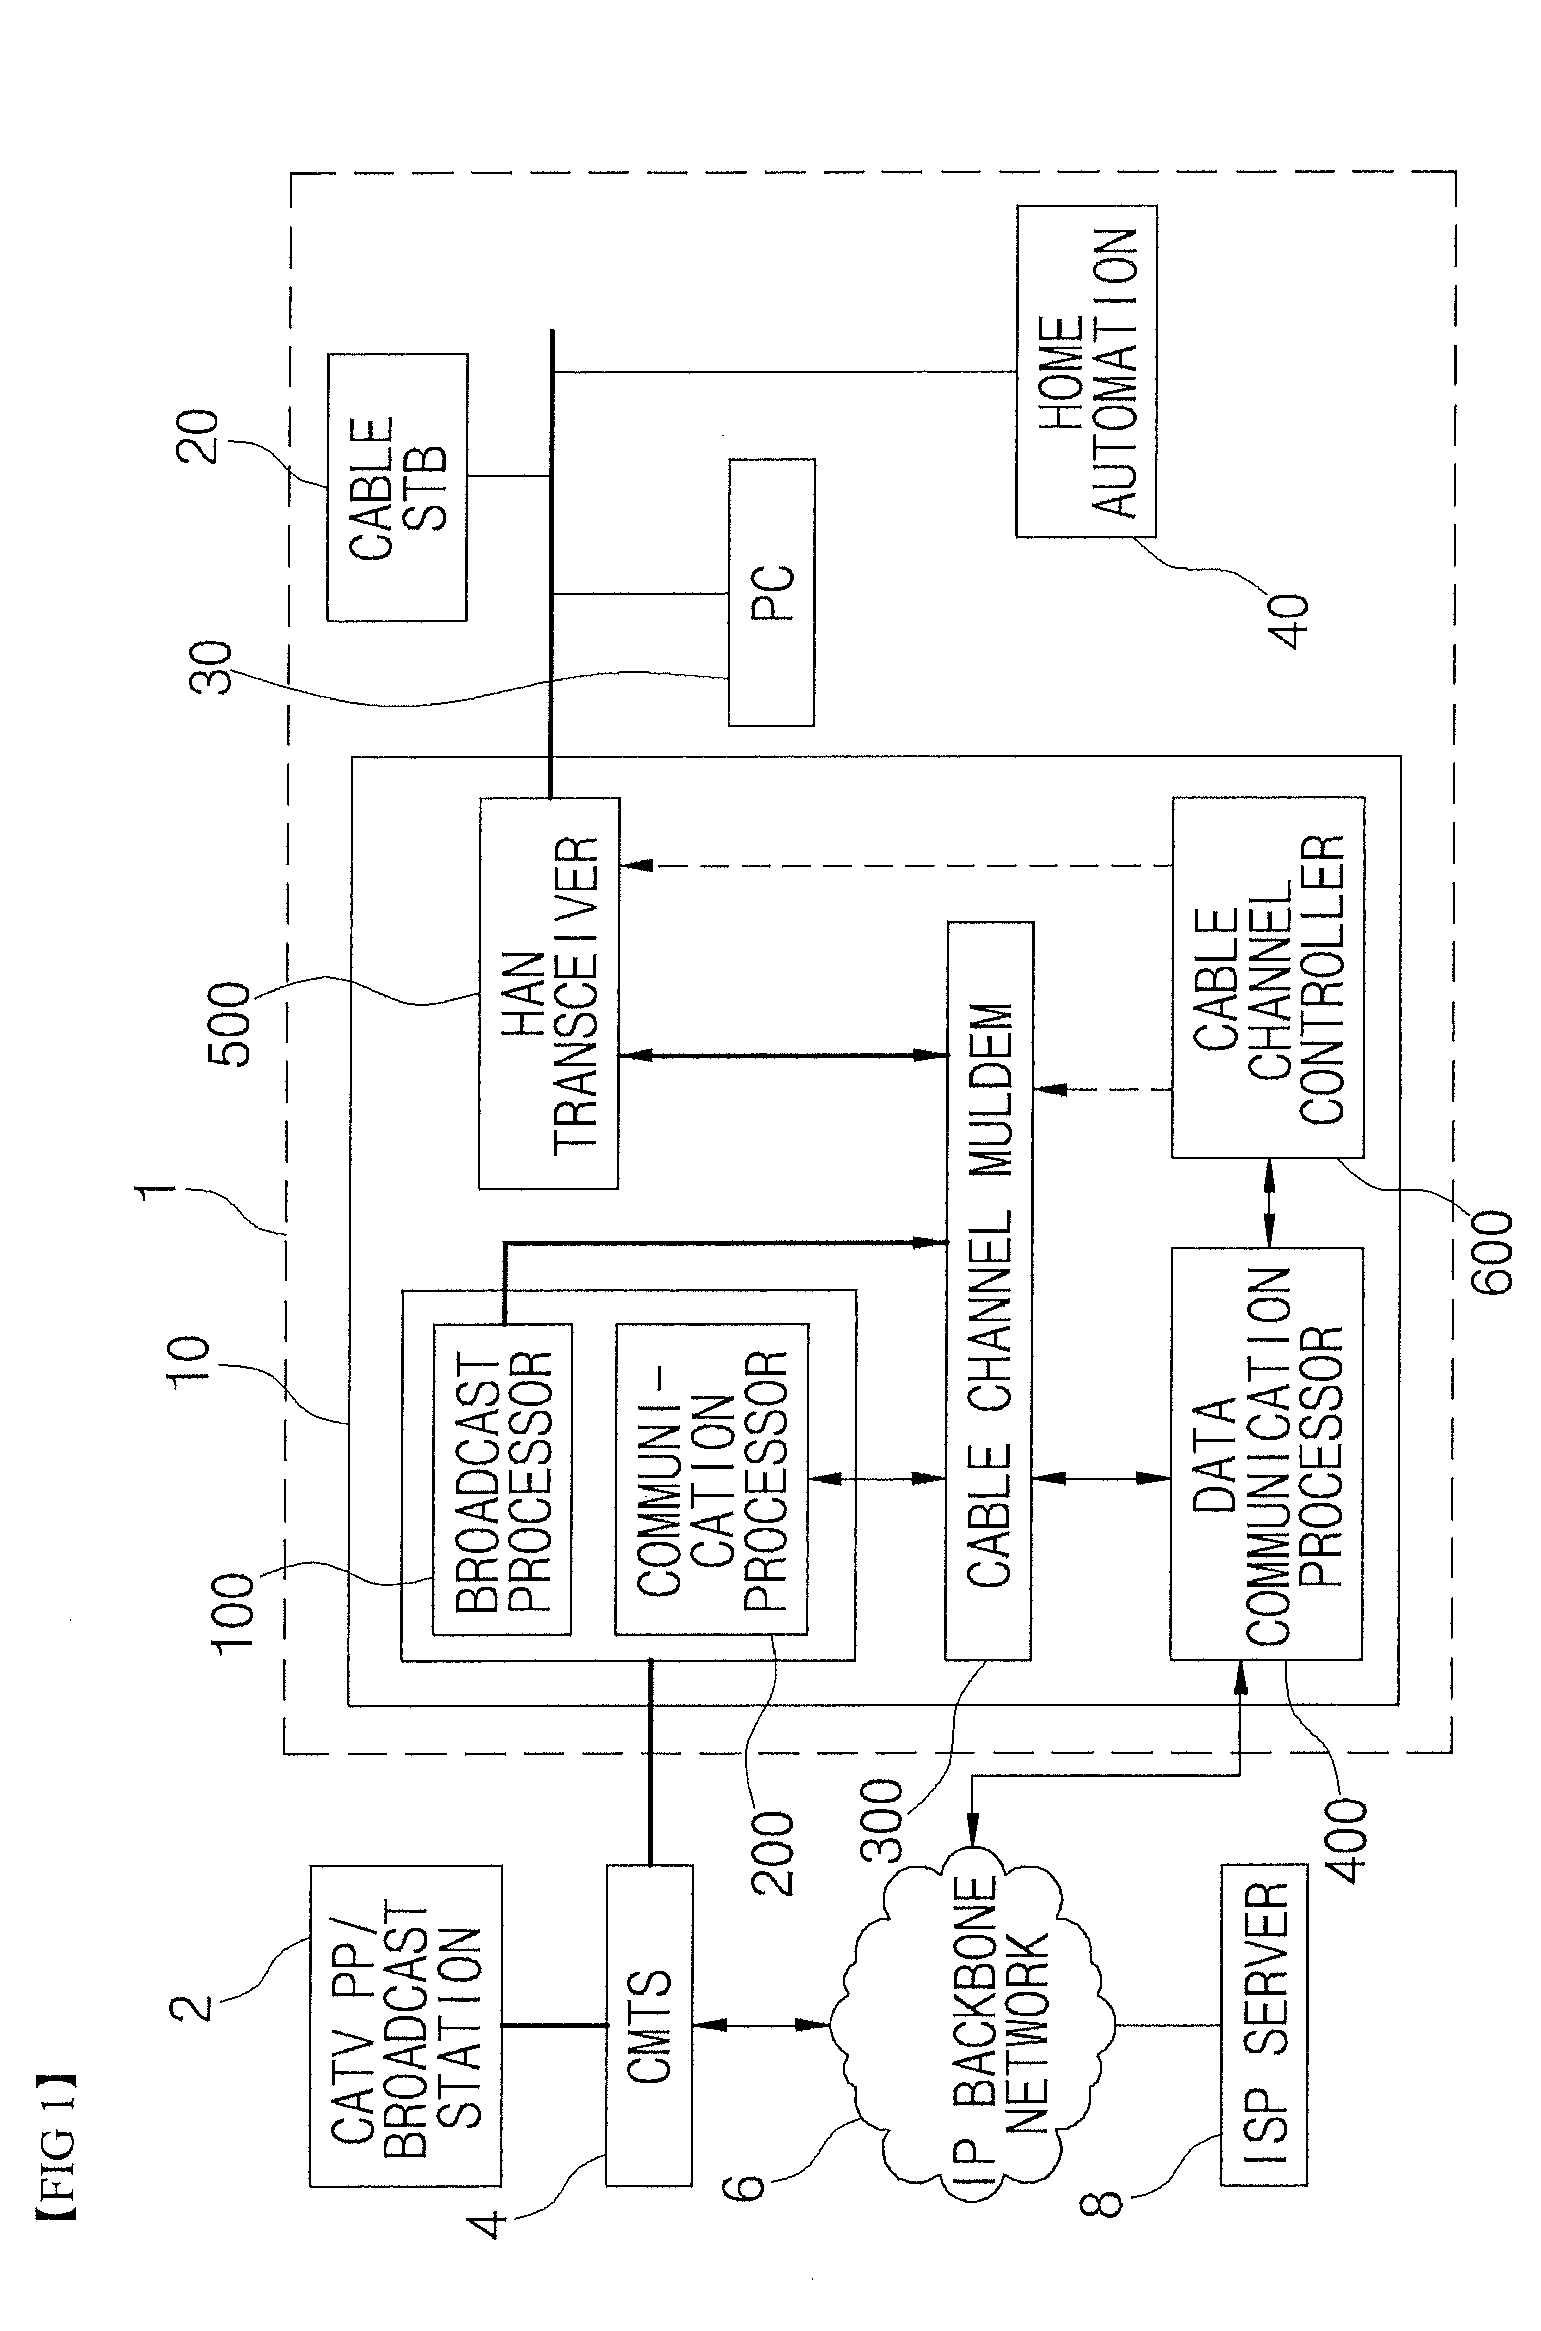 Method and apparatus for coaxial cable based broadcast and communication convergence in home network